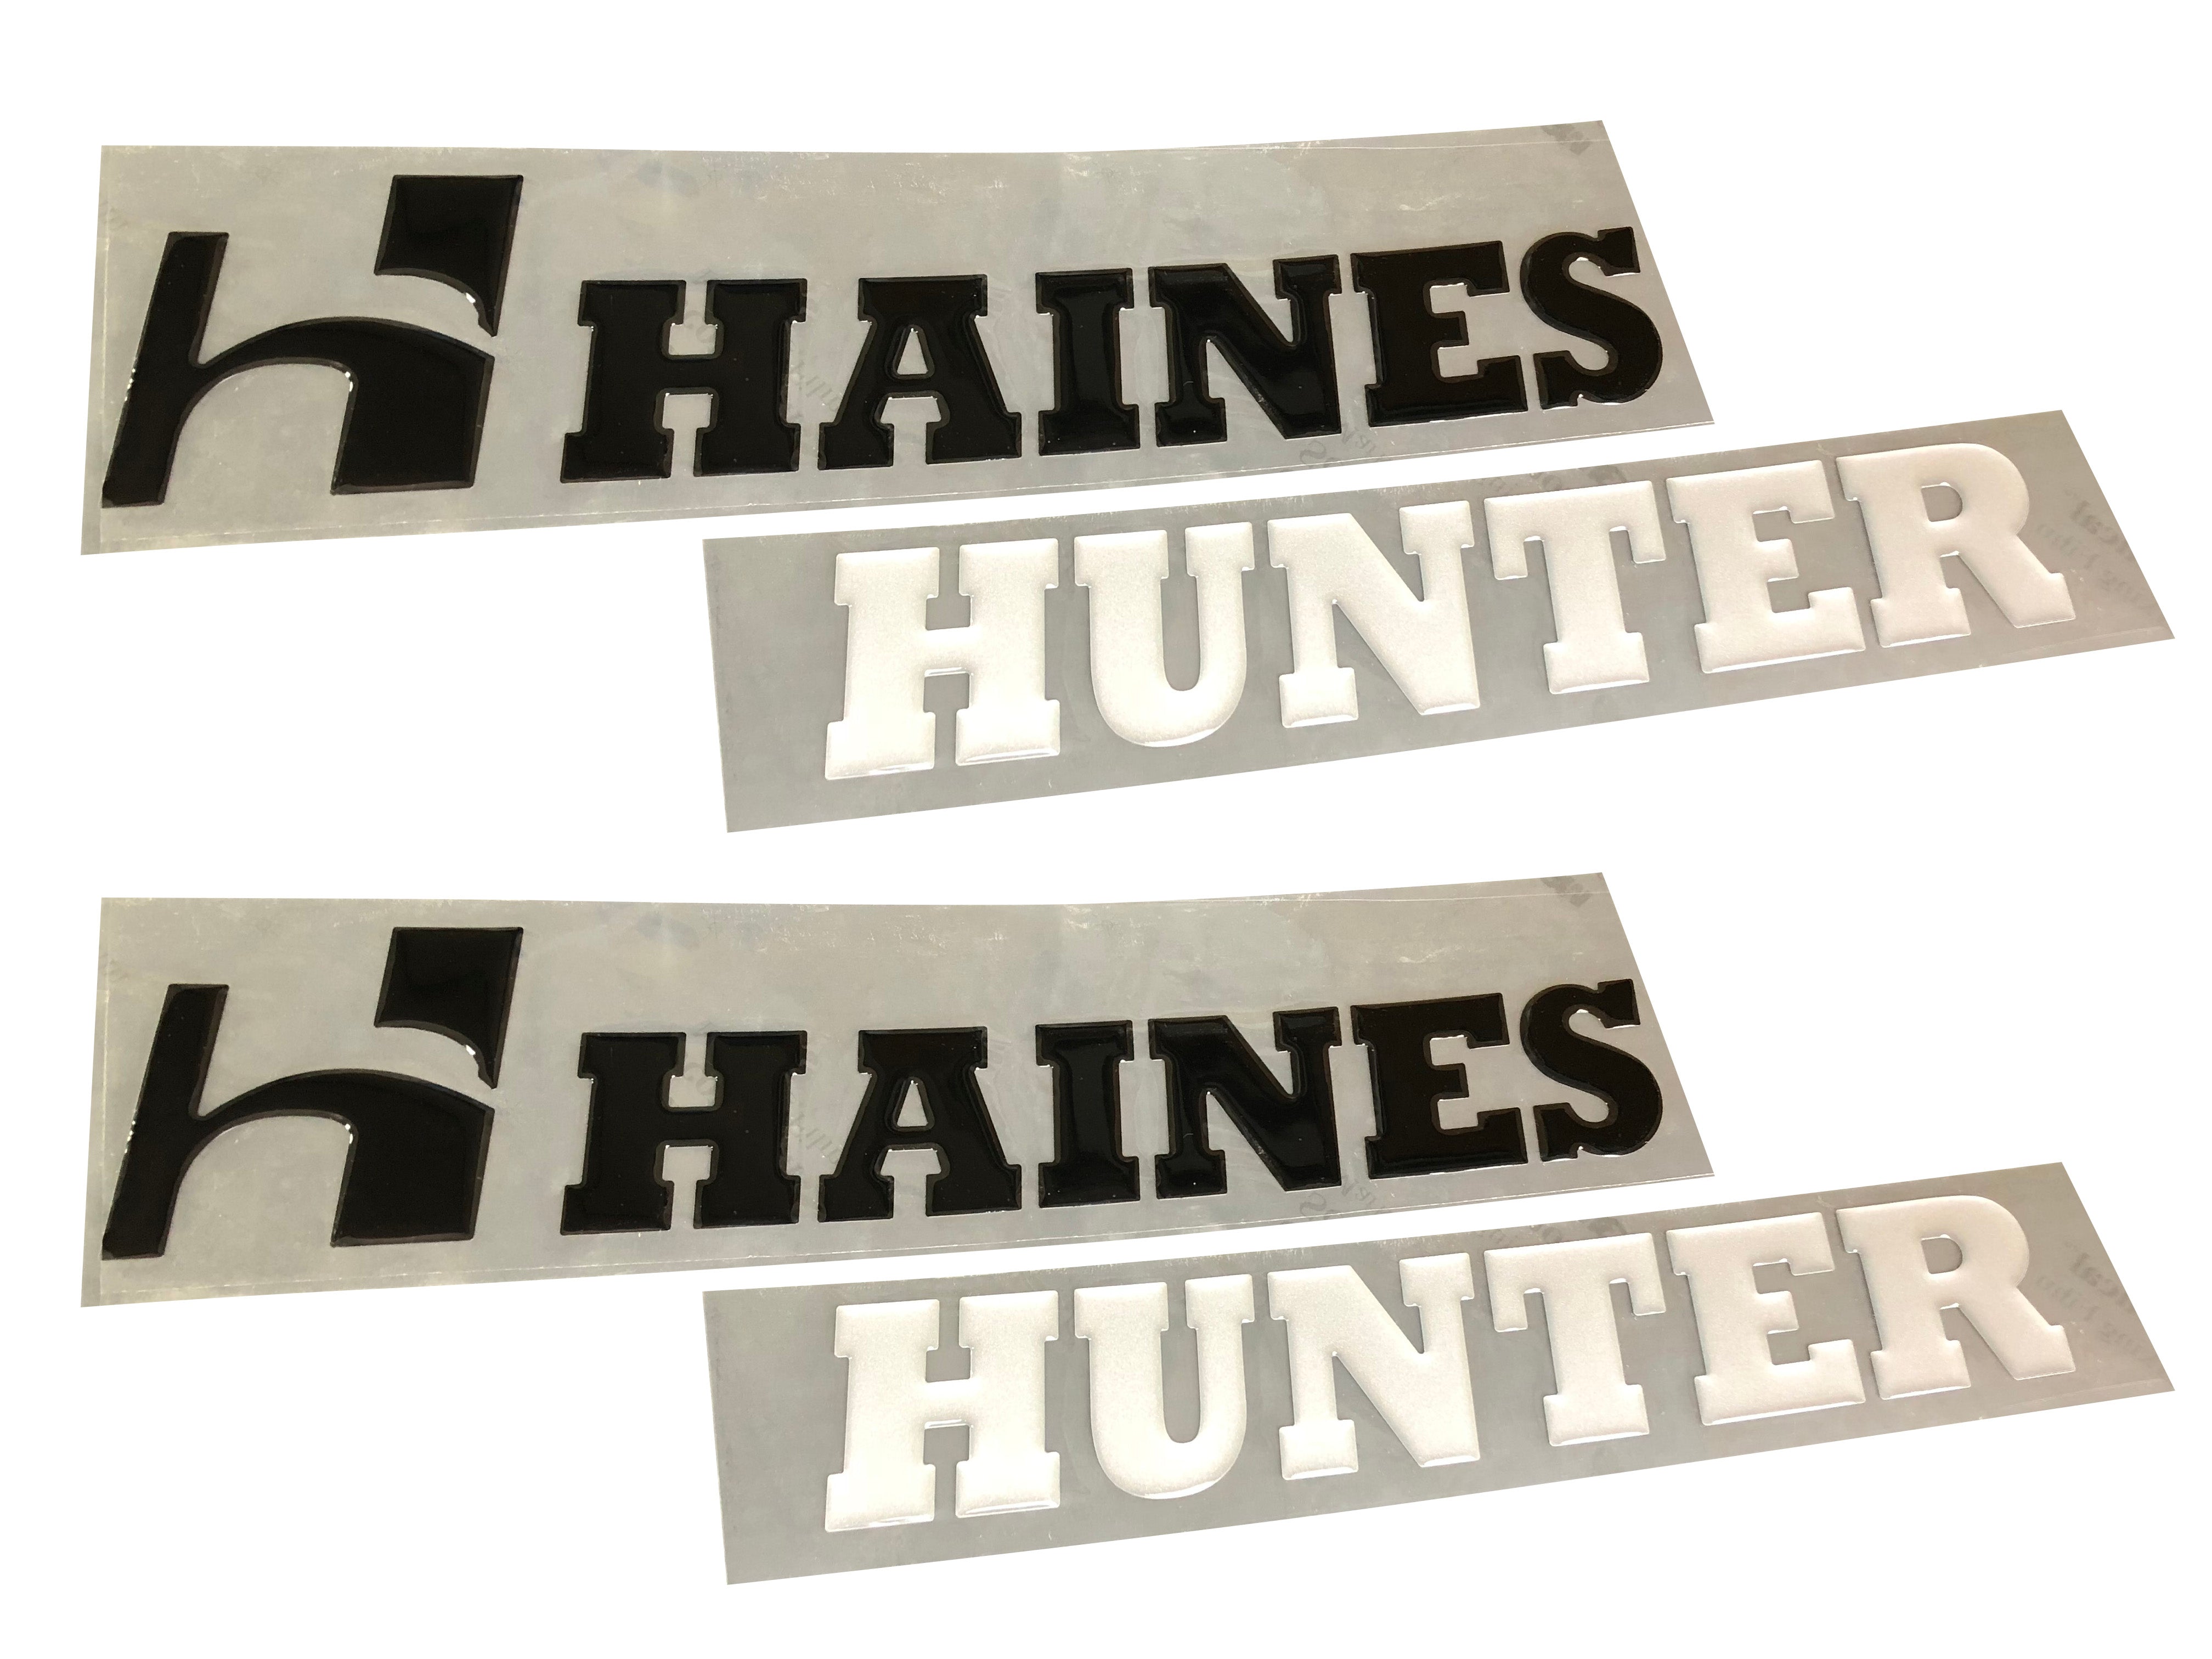 HAINES HUNTER - 500mm X 70mm X 2 - DECALS - BOAT DECALS $30.00